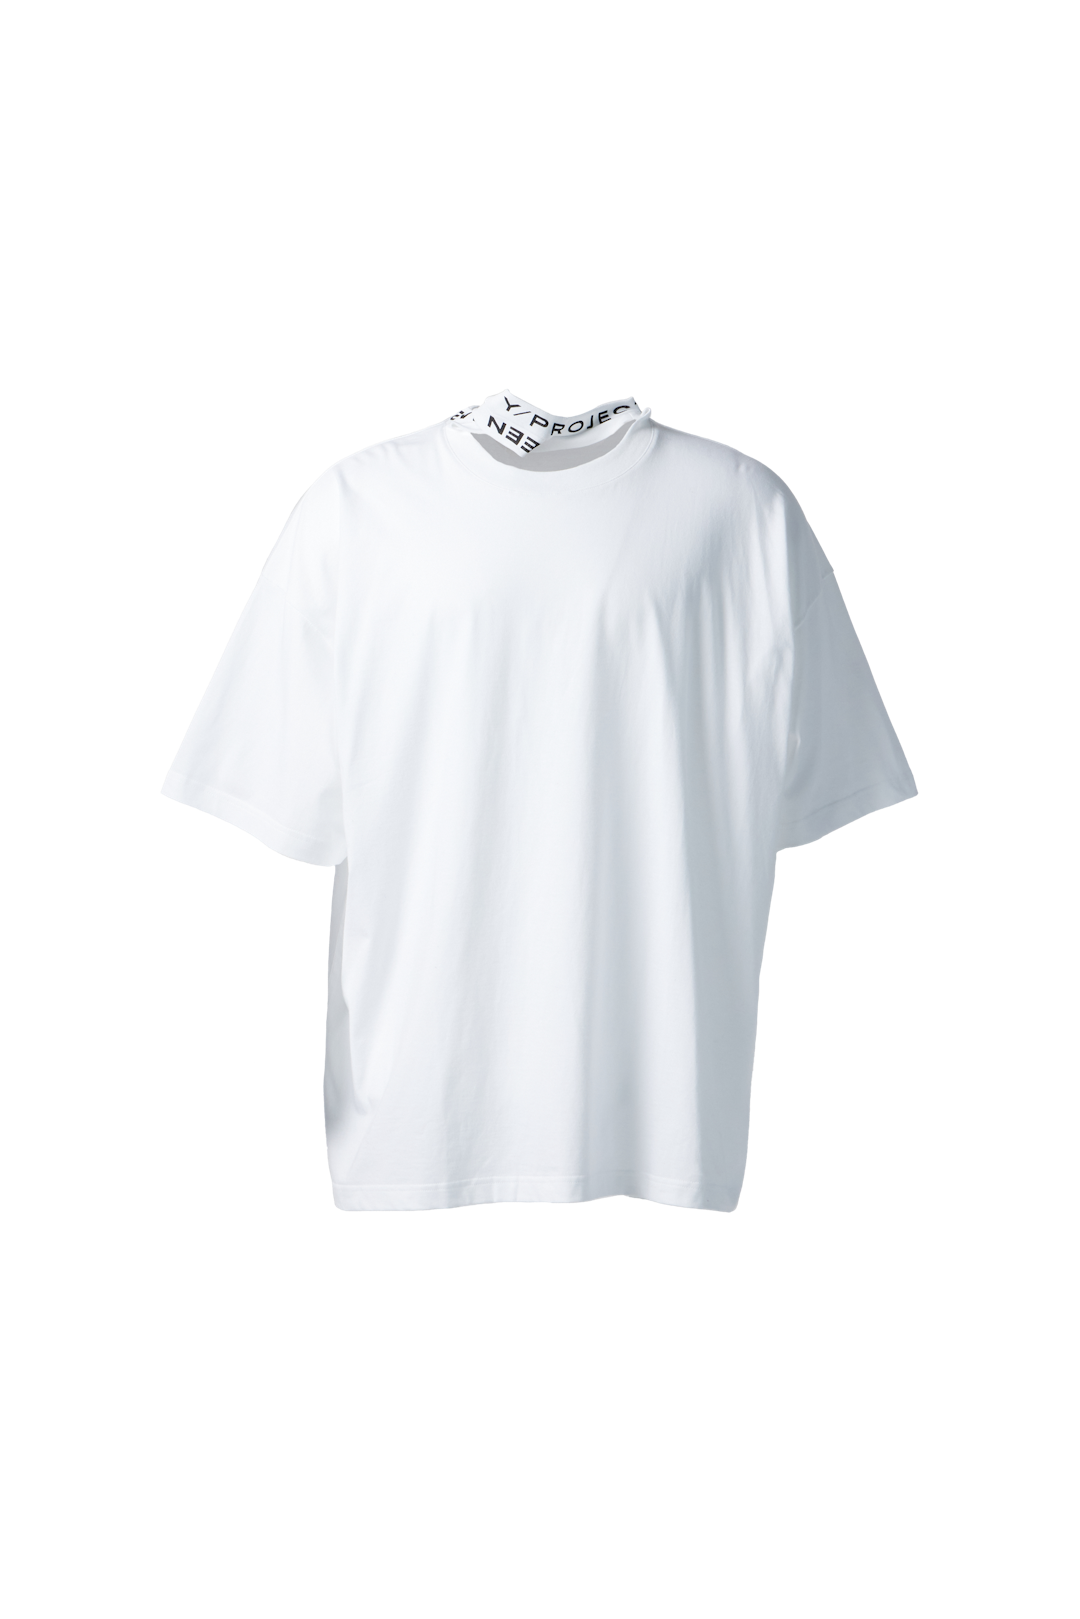 Y/PROJECT - Evergreen Triple Collar T-Shirt product image